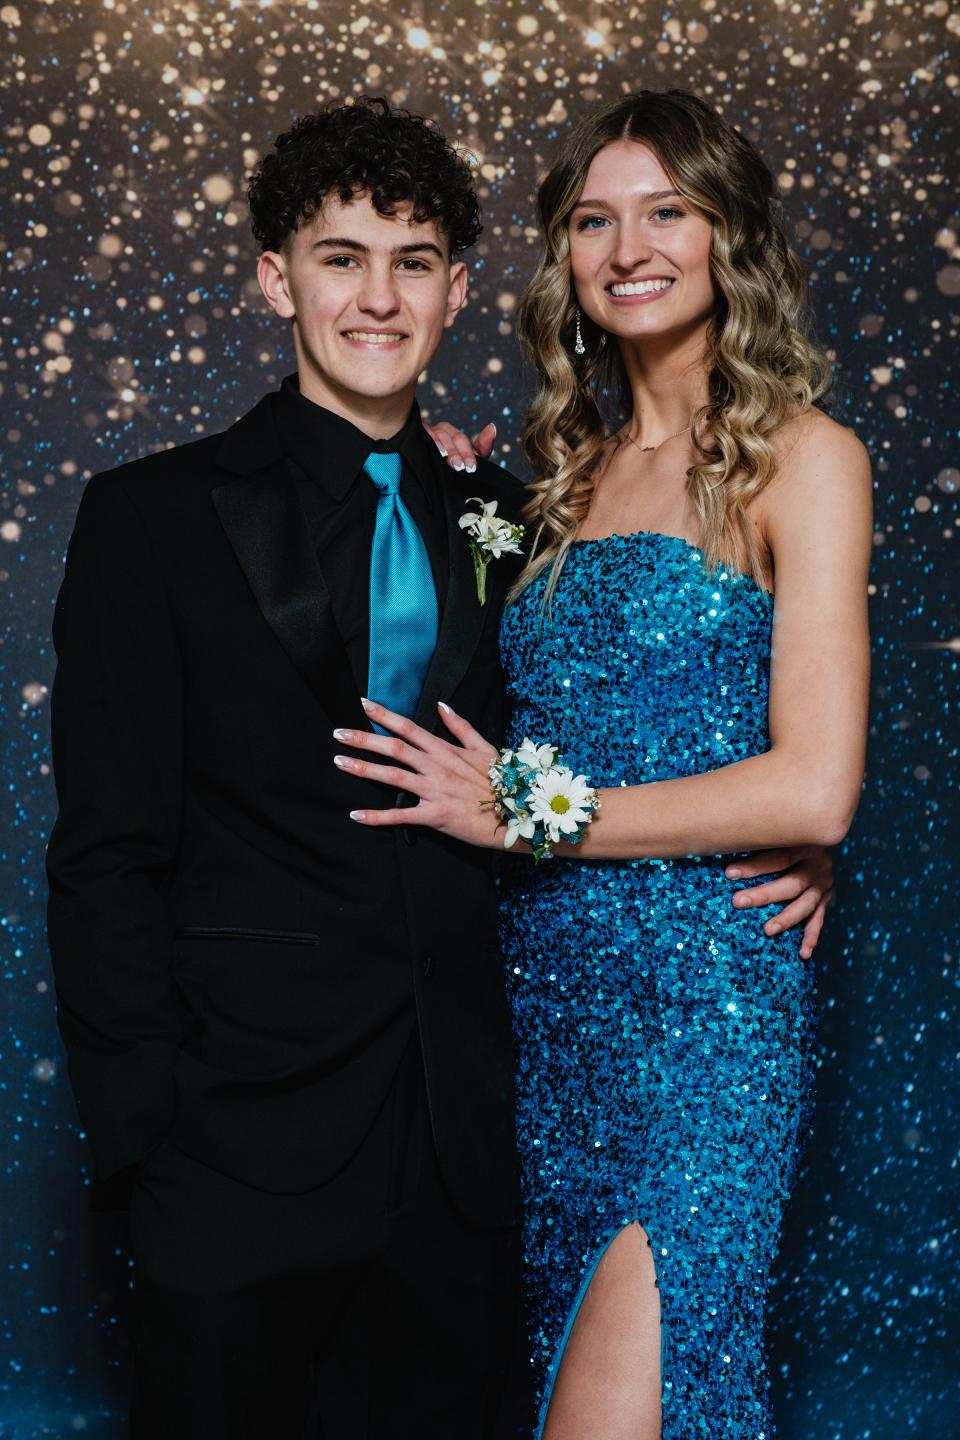 Austen Gunn, a senior, accompanies his good friend, Caroline Hanner, a sophomore, during Indian Valley's prom, Saturday, at the Kent State University Tuscarawas Performing Arts Center. To view more photos visit news@timesreporter.com .